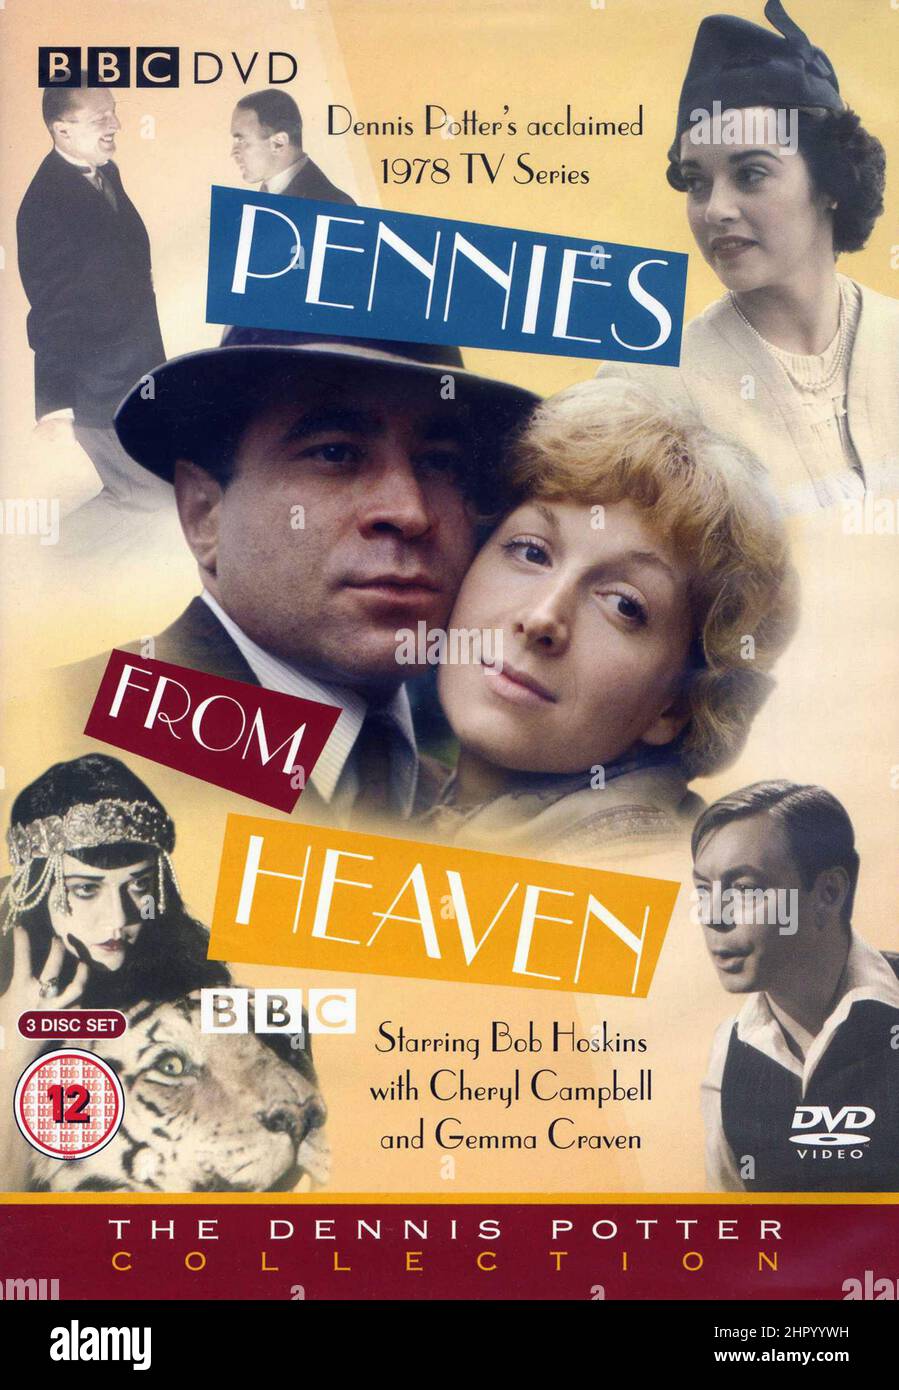 DVD Cover. 'Pennies From Heaven'. Dennis Potter. Stock Photo